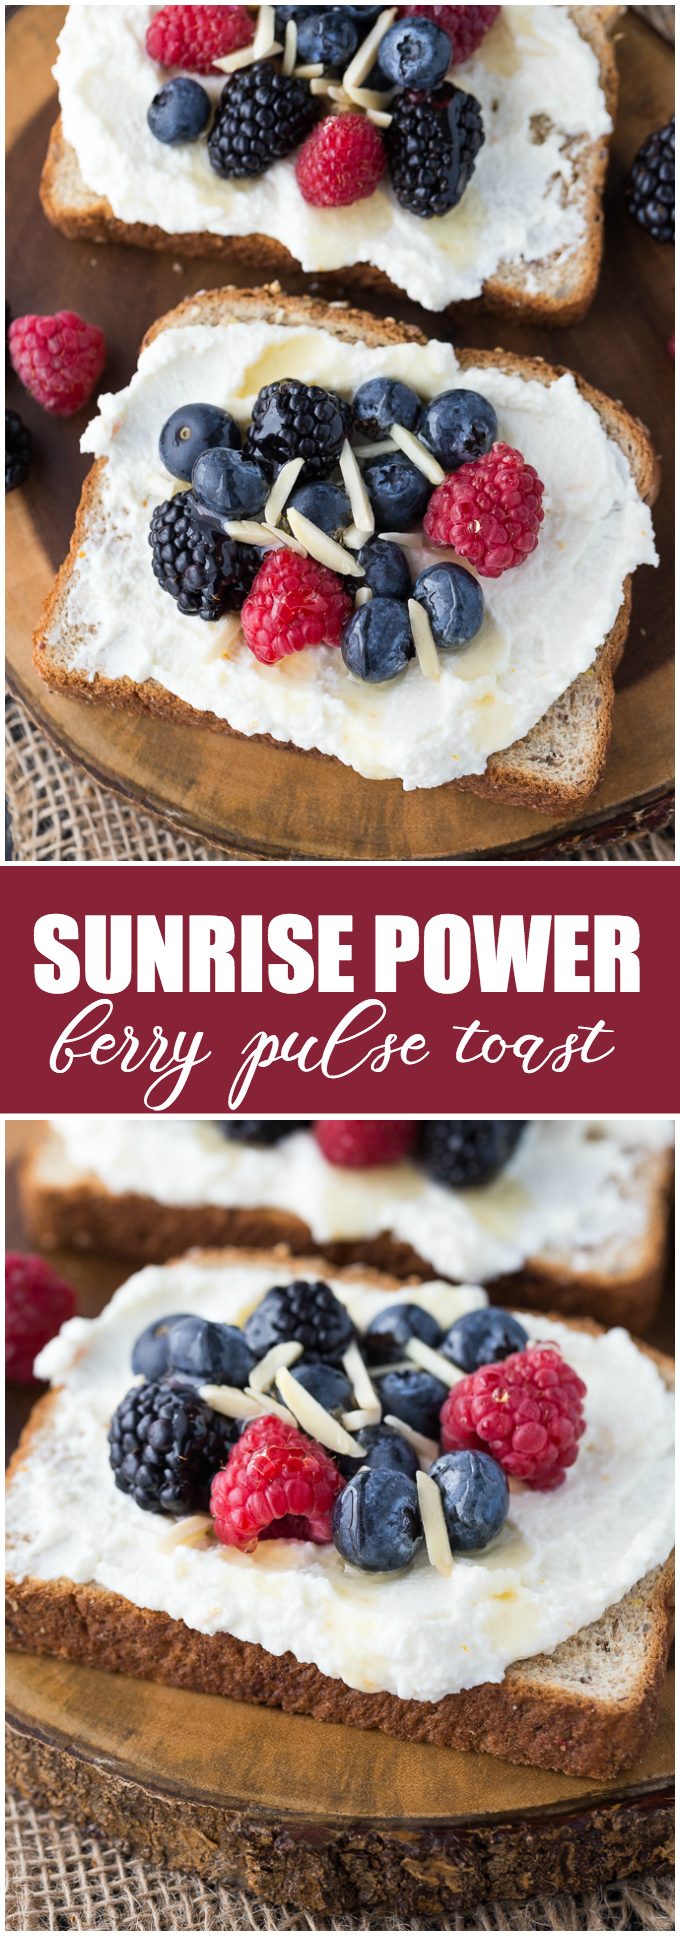 Sunrise Power Berry Pulse Toast - This protein-packed pulse bread, with delicious and creamy ricotta layer with citrus and sweet berries is a healthy and filling way to start the day.